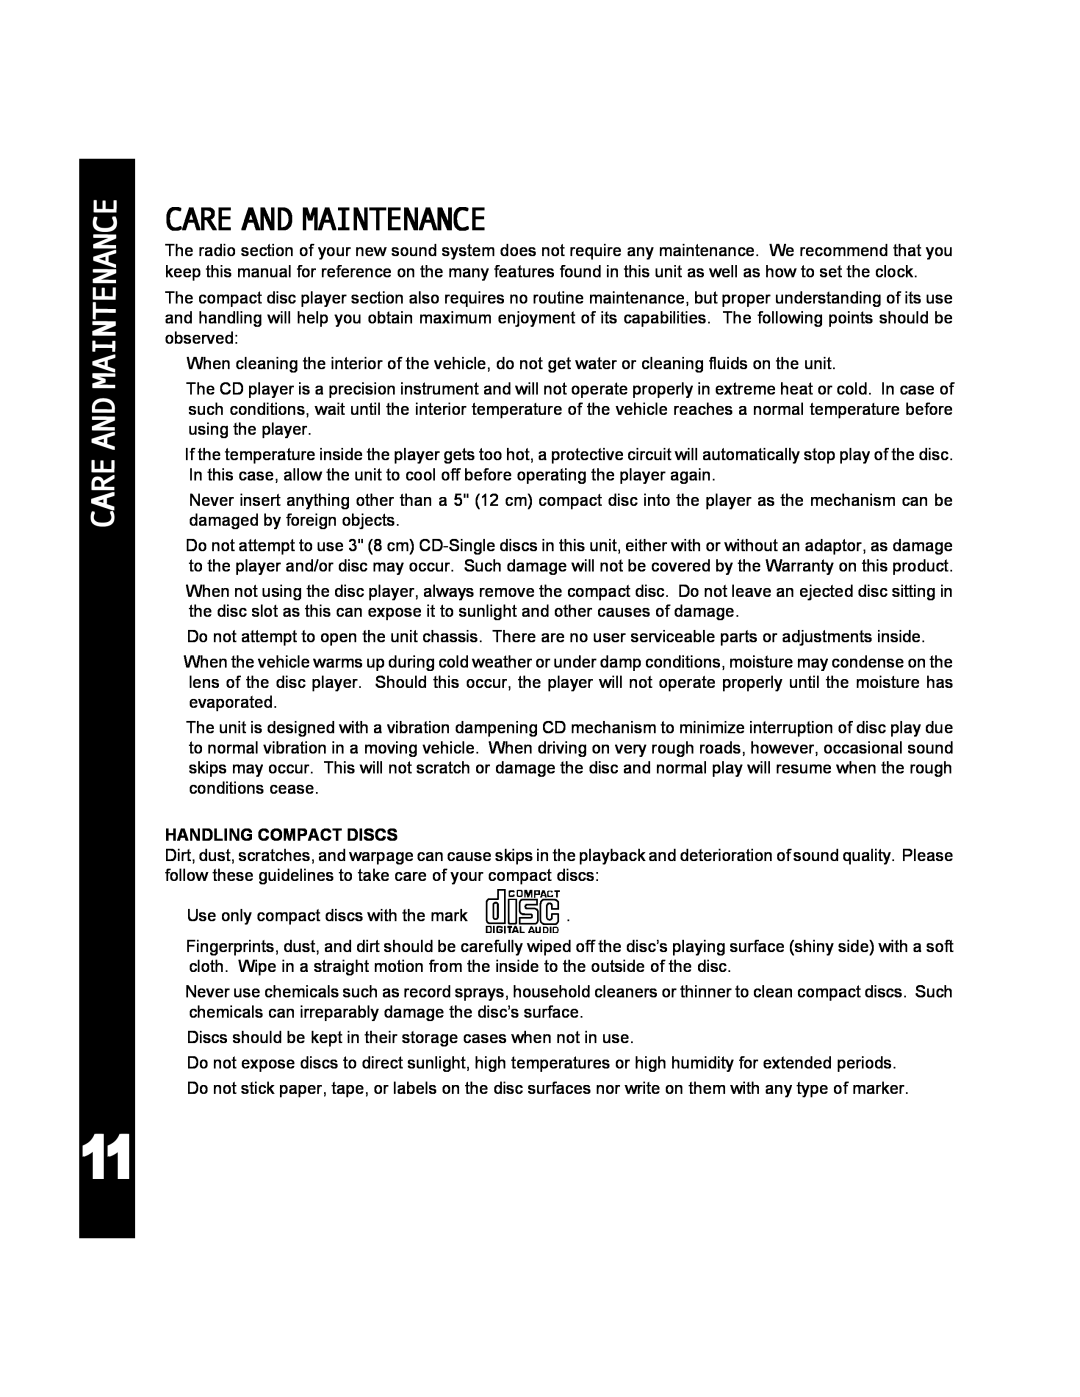 Audiovox ACD-25 manual Care And Maintenance 